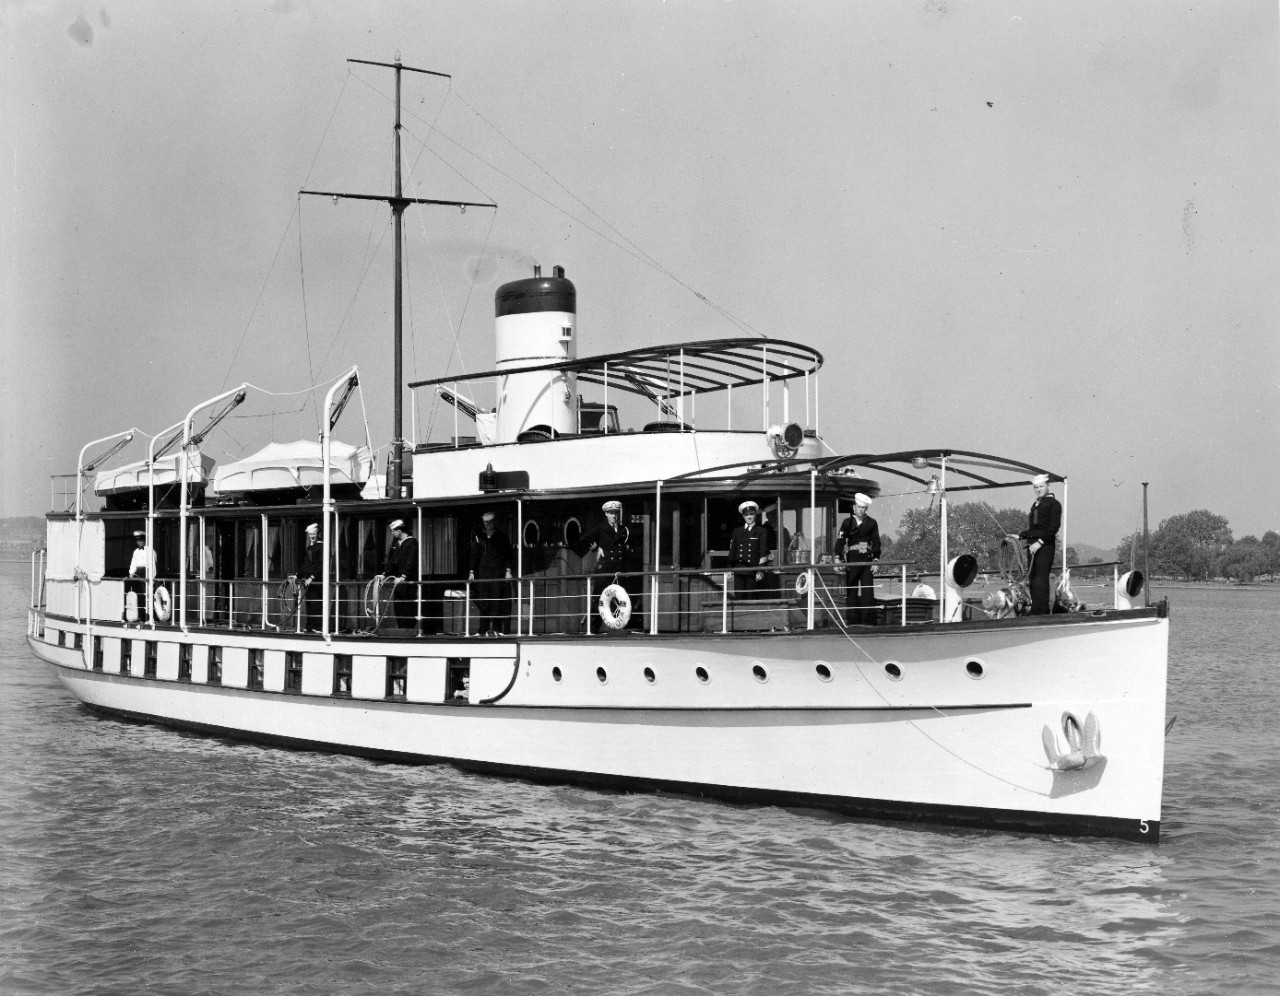 Collection of six b/w photographs related to the naval service of John Leonard Newton Scrogham, Boatswain’s Mate Second Class, circa 1939. Scrogham’s first assignment was service aboard USS Sequoia (presidential yacht, though in 1939 it was the yacht of the Secretary of the Navy). The collection includes an image of the ship as well as one of its crew (which includes Scrogham). Also included is a portrait of Scrogham. His discharge papers note that he also served aboard USS Ranger and USS Missouri, (a 1939 image of USS Ranger is also included in the collection). 